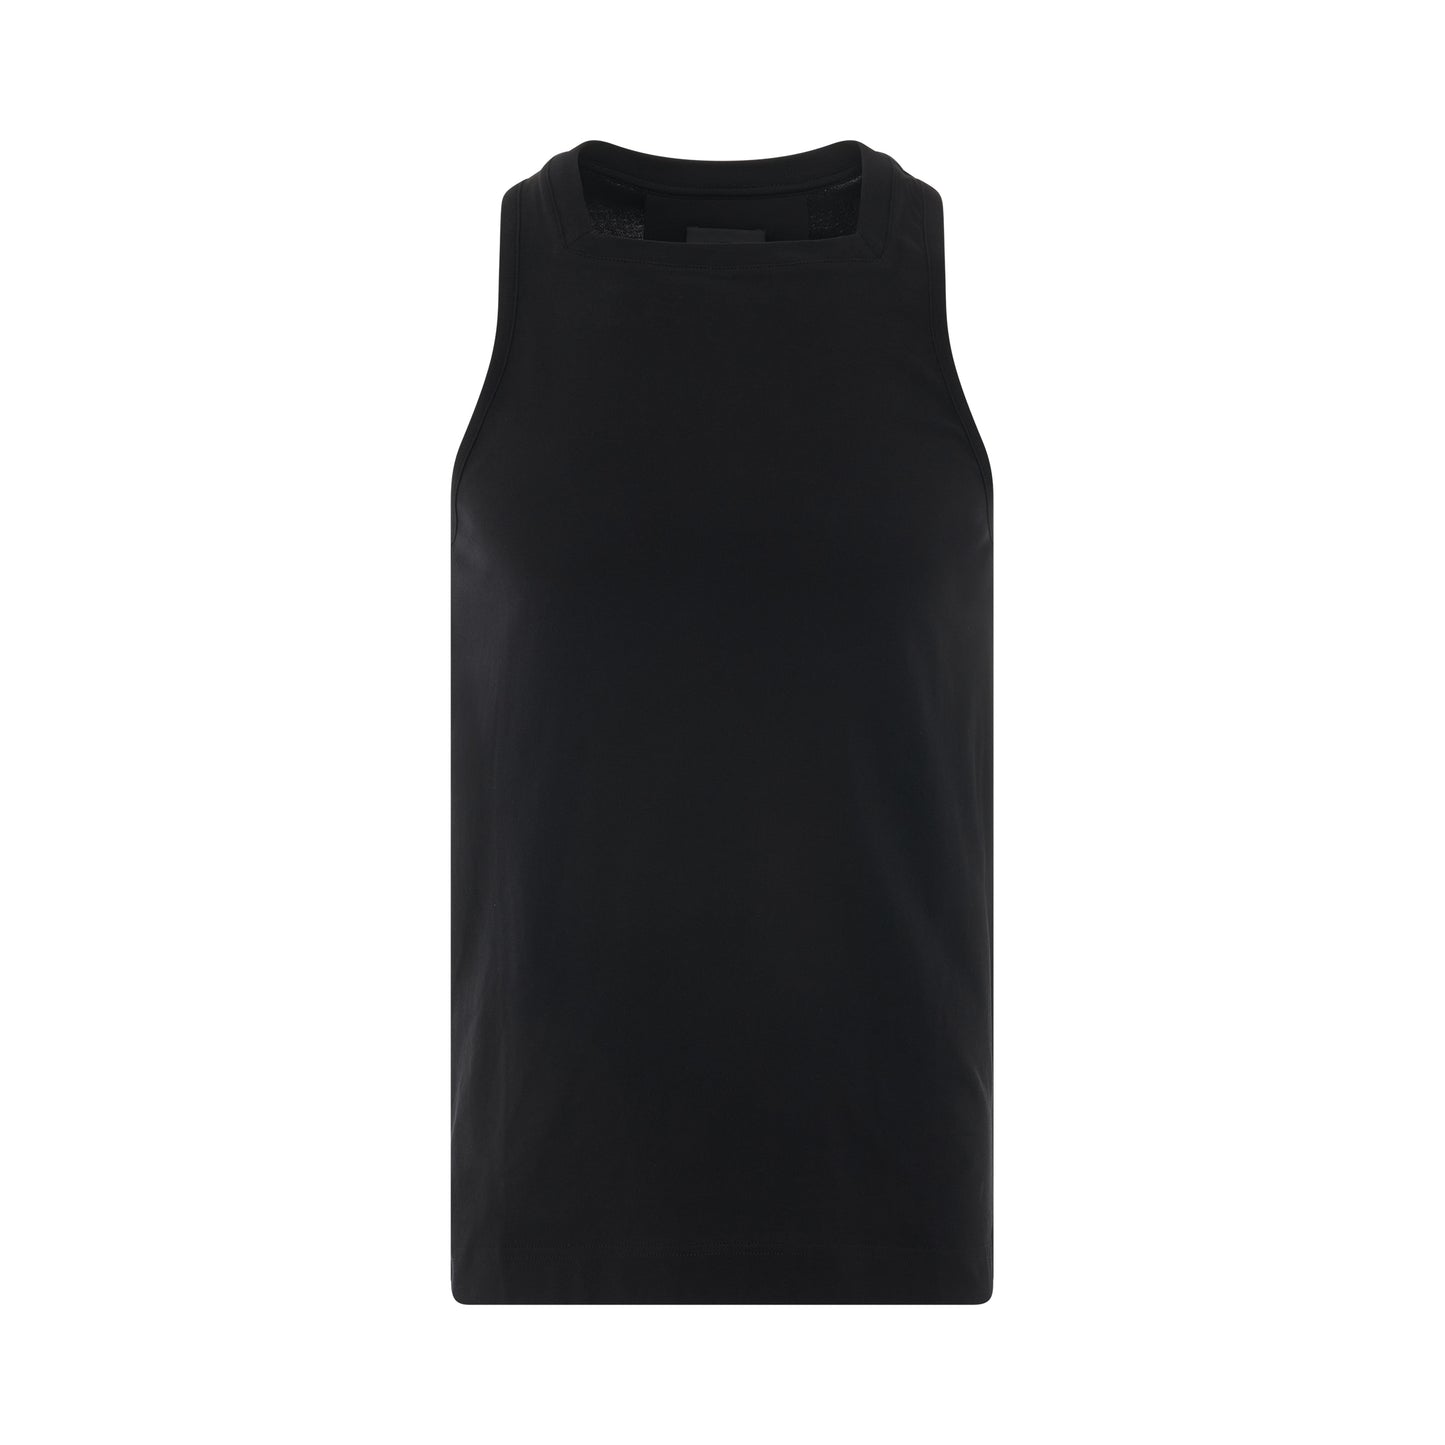 Slim Fit Tank Top with Square Collar in Black